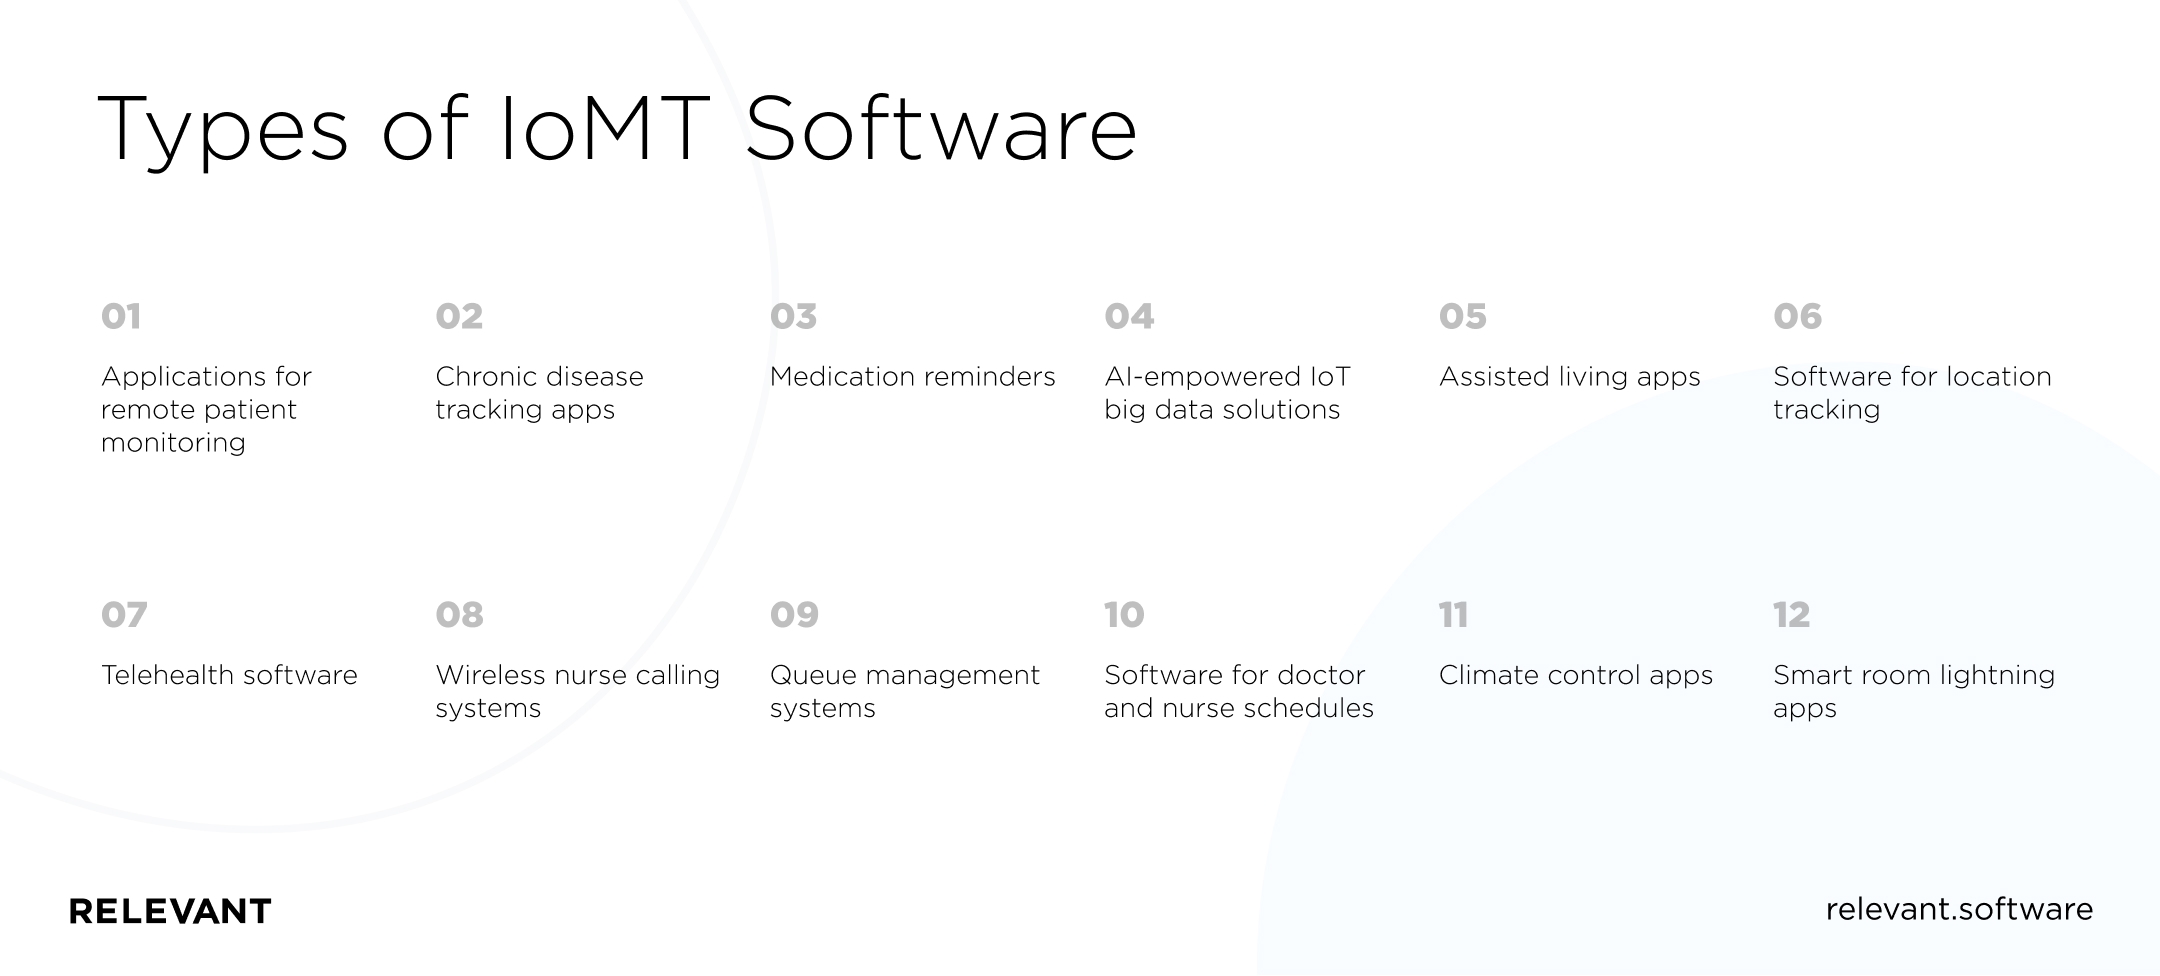 Types of IoMT Software